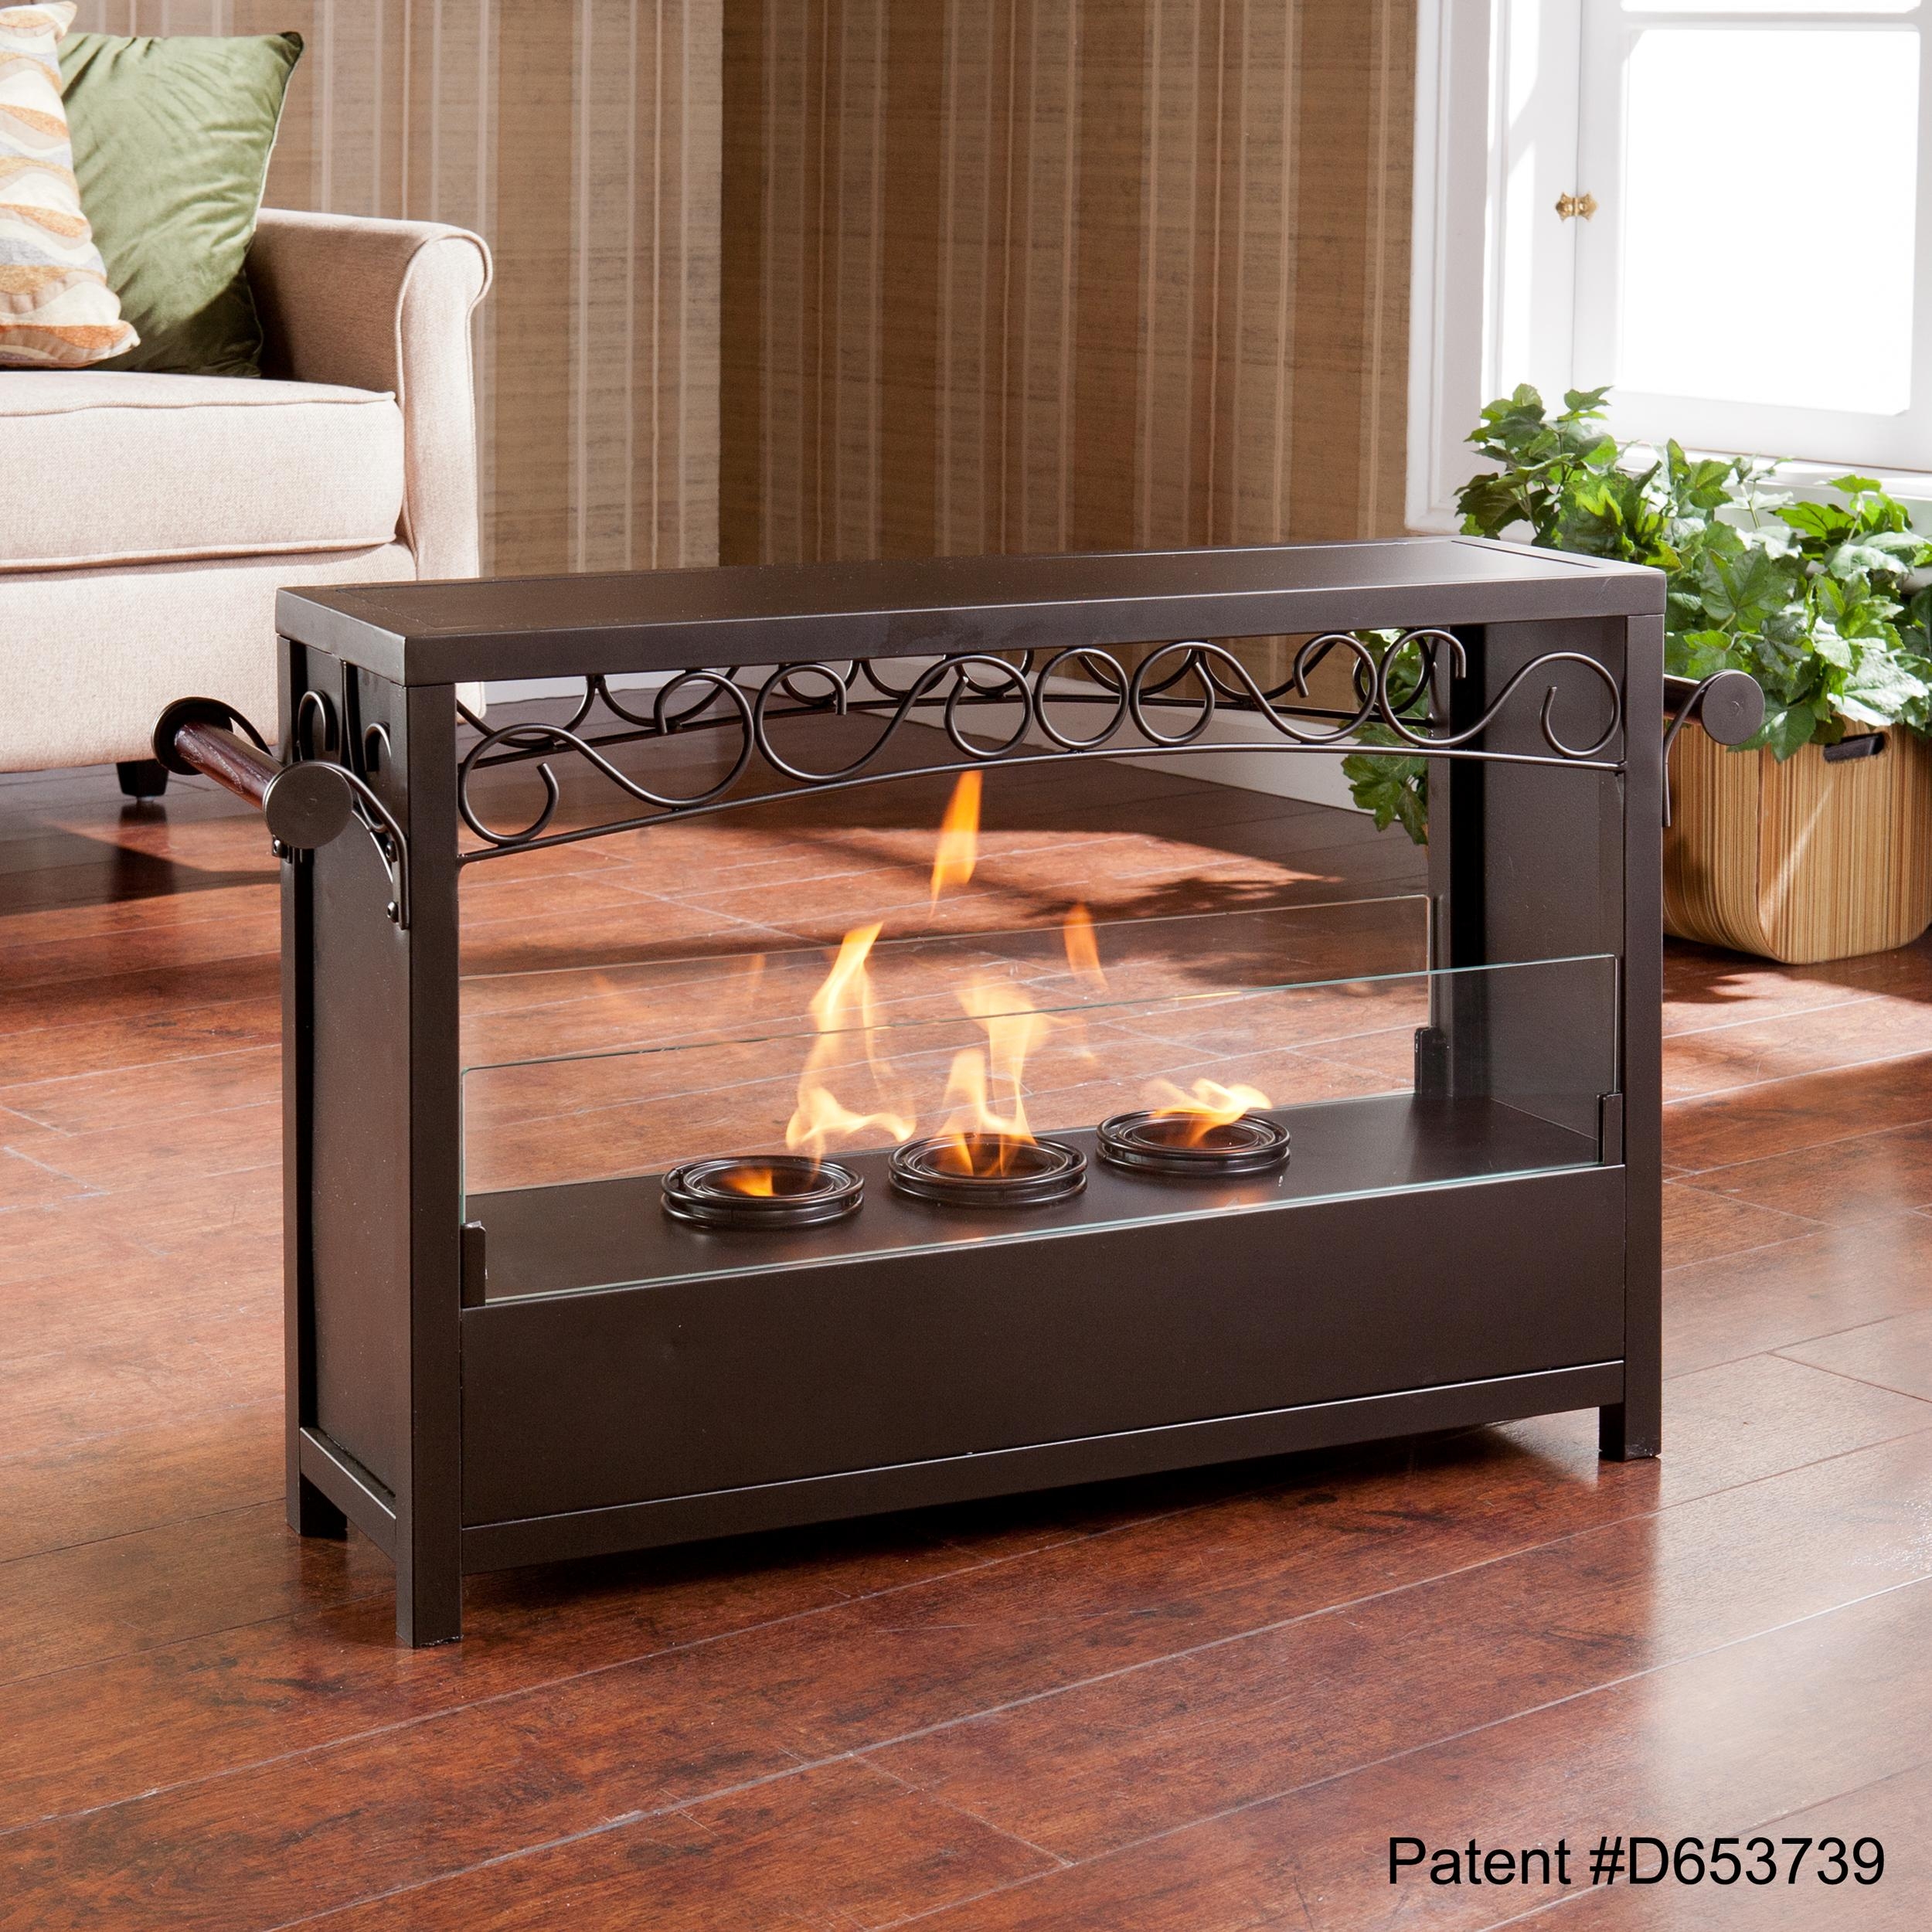 Outdoor Electric Fireplace Visualhunt, Outdoor Electric Fireplaces With Heat